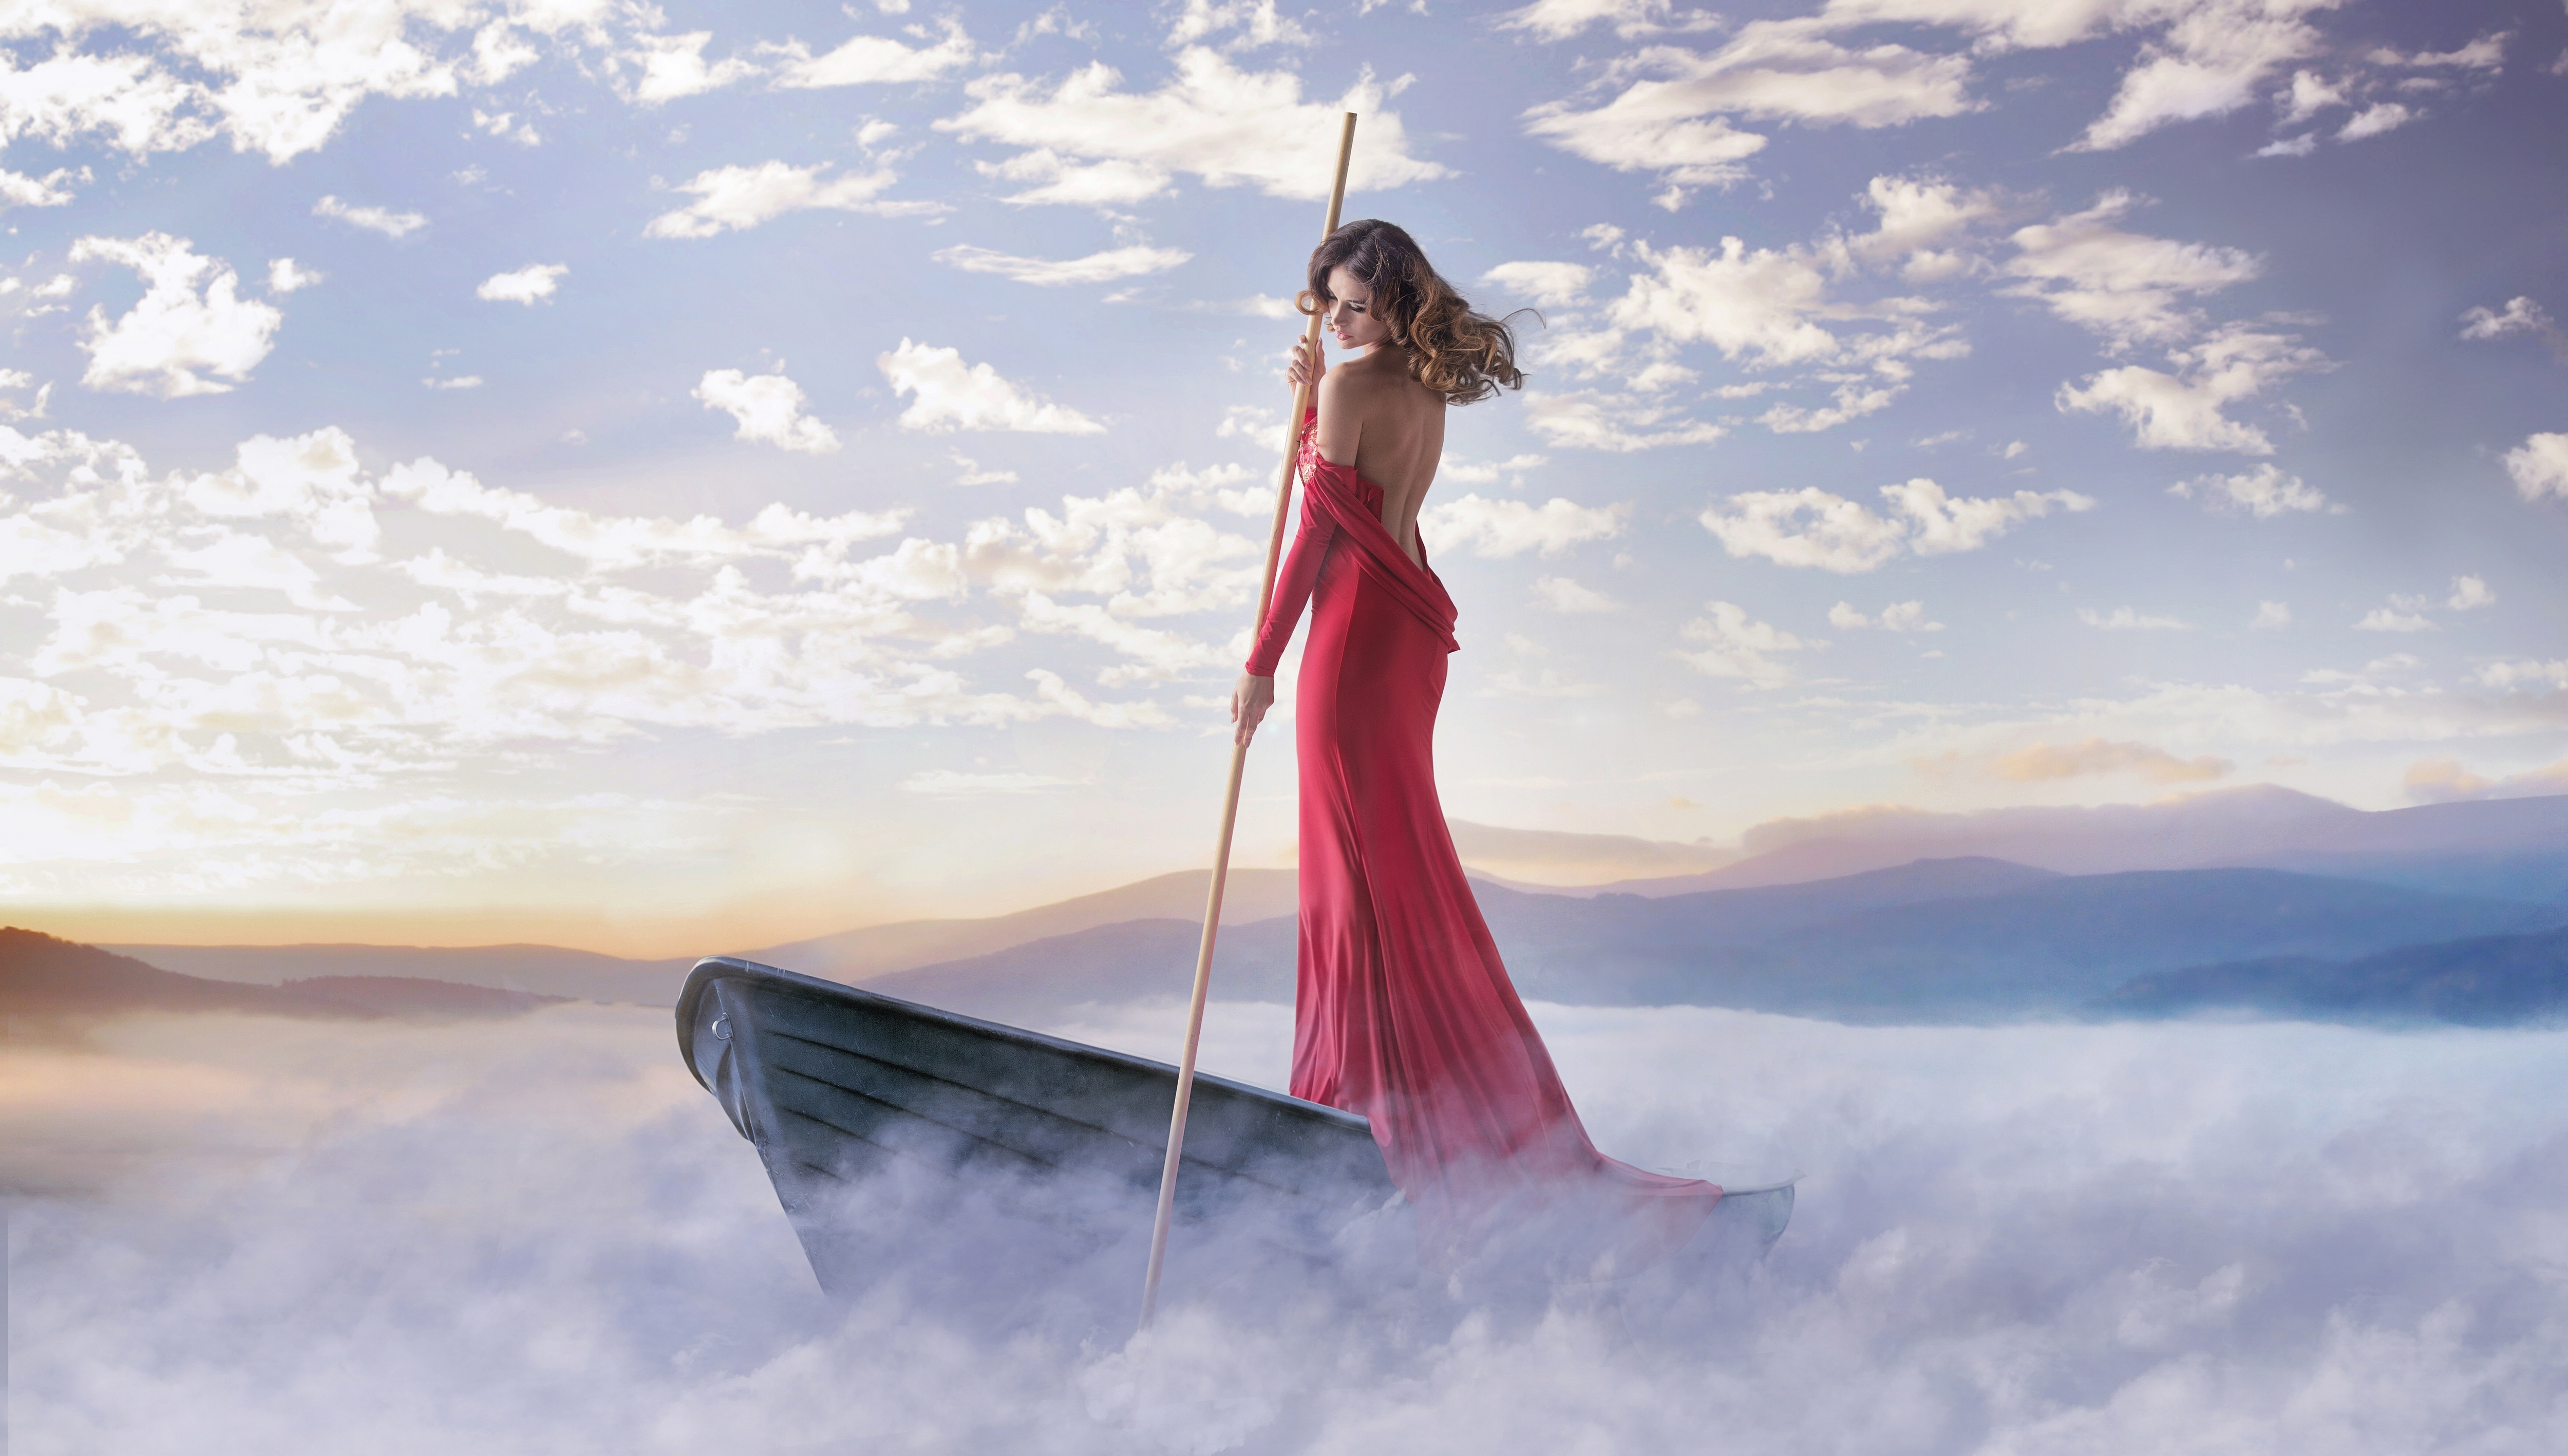 Women Long Hair Boat Vehicle Back Dress Standing Sky Clouds Backless Bare Shoulders 5000x2835